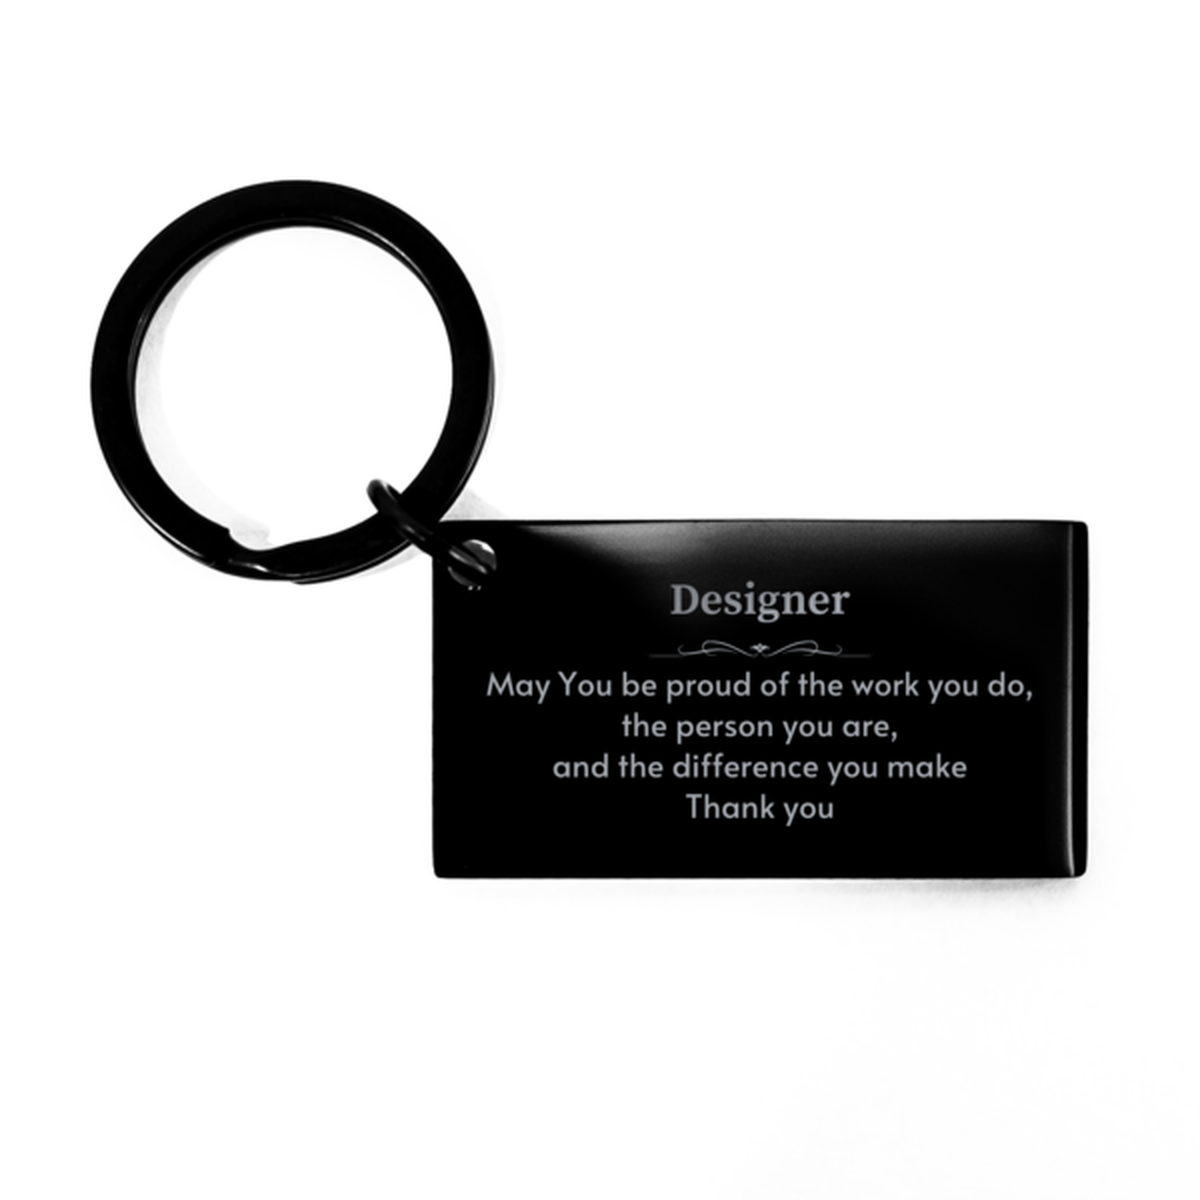 Heartwarming Keychain Retirement Coworkers Gifts for Designer, Graphic Designer May You be proud of the work you do, the person you are Gifts for Boss Men Women Friends